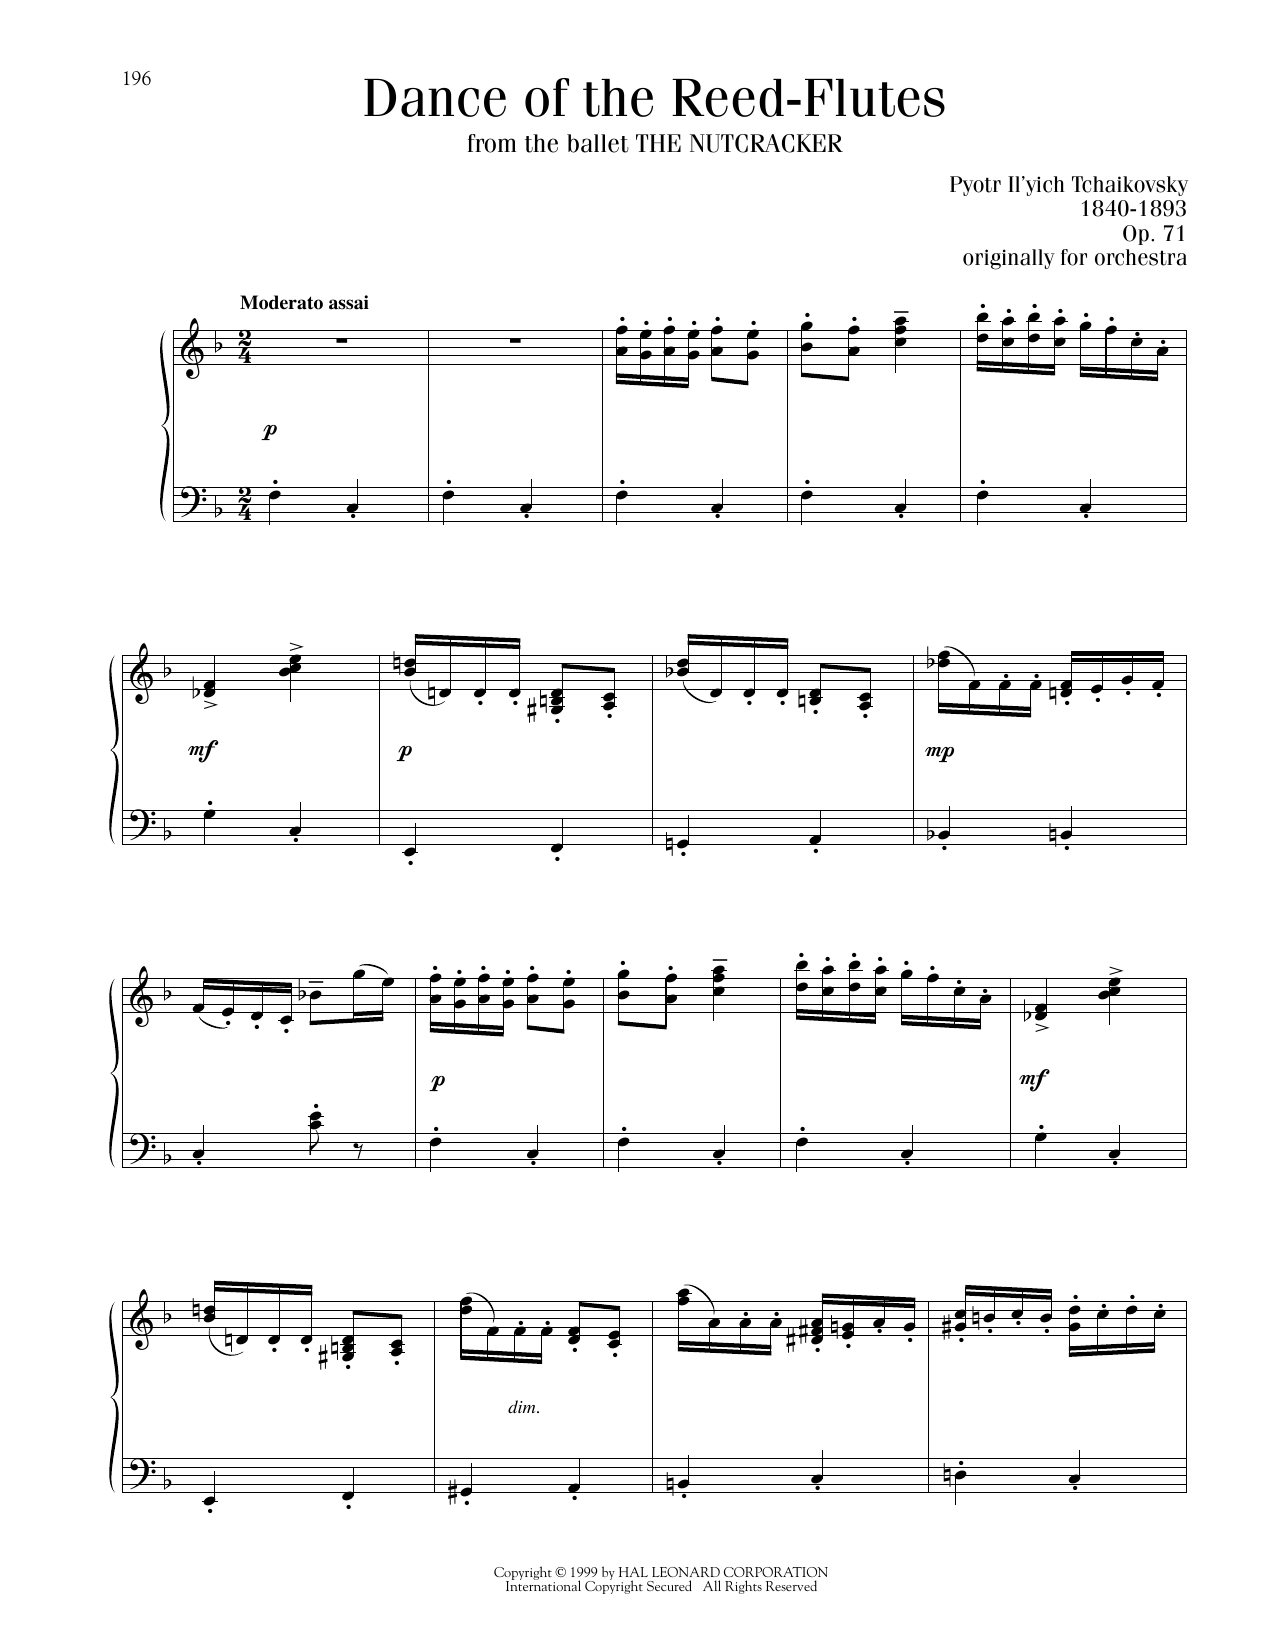 Pyotr Il'yich Tchaikovsky Dance Of The Reed Flutes, Op. 71a sheet music notes printable PDF score